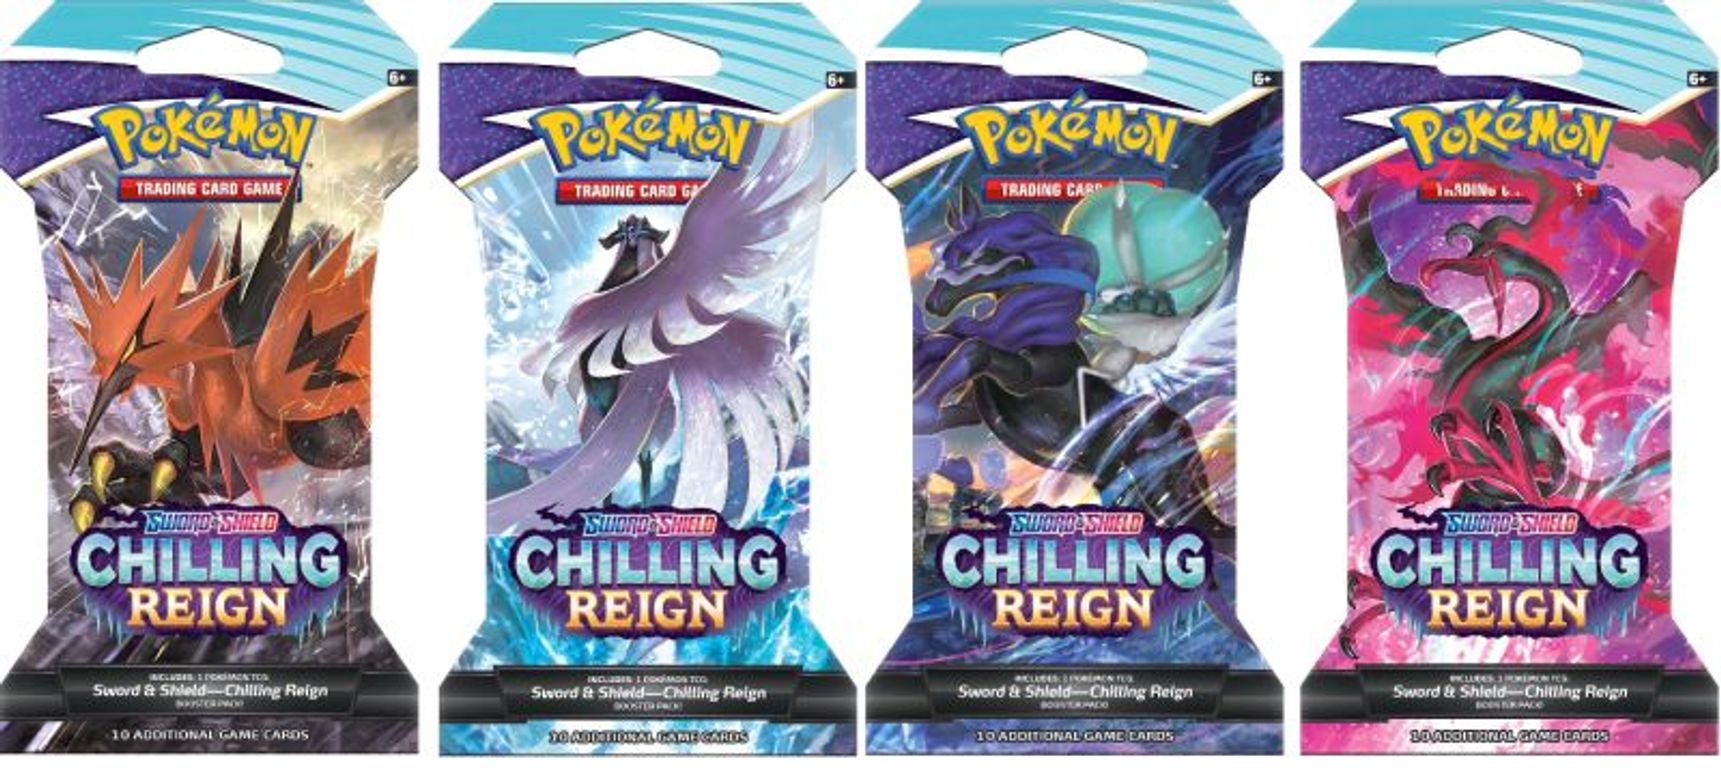 Pokémon TCG: Sword & Shield-Chilling Reign Sleeved Booster Pack box